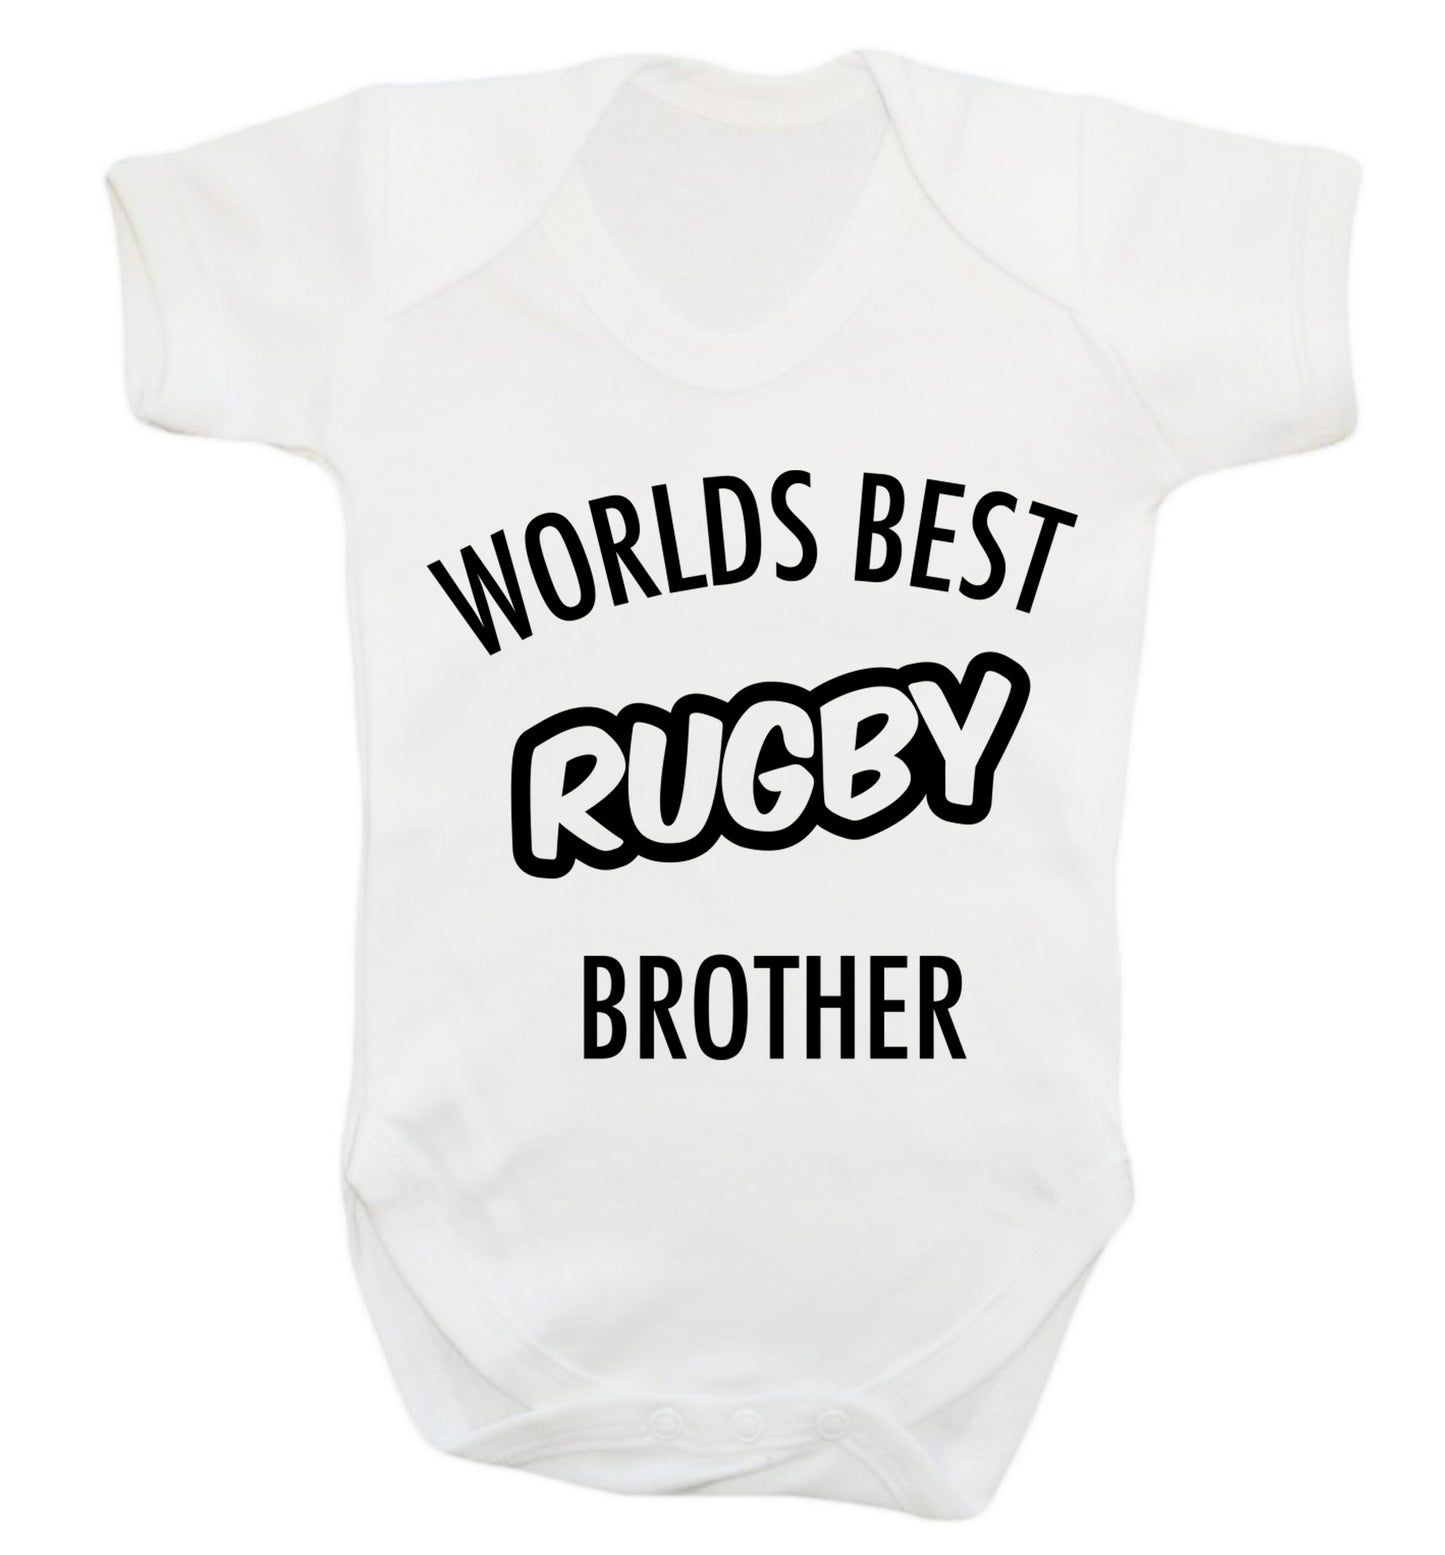 Worlds best rugby brother Baby Vest white 18-24 months